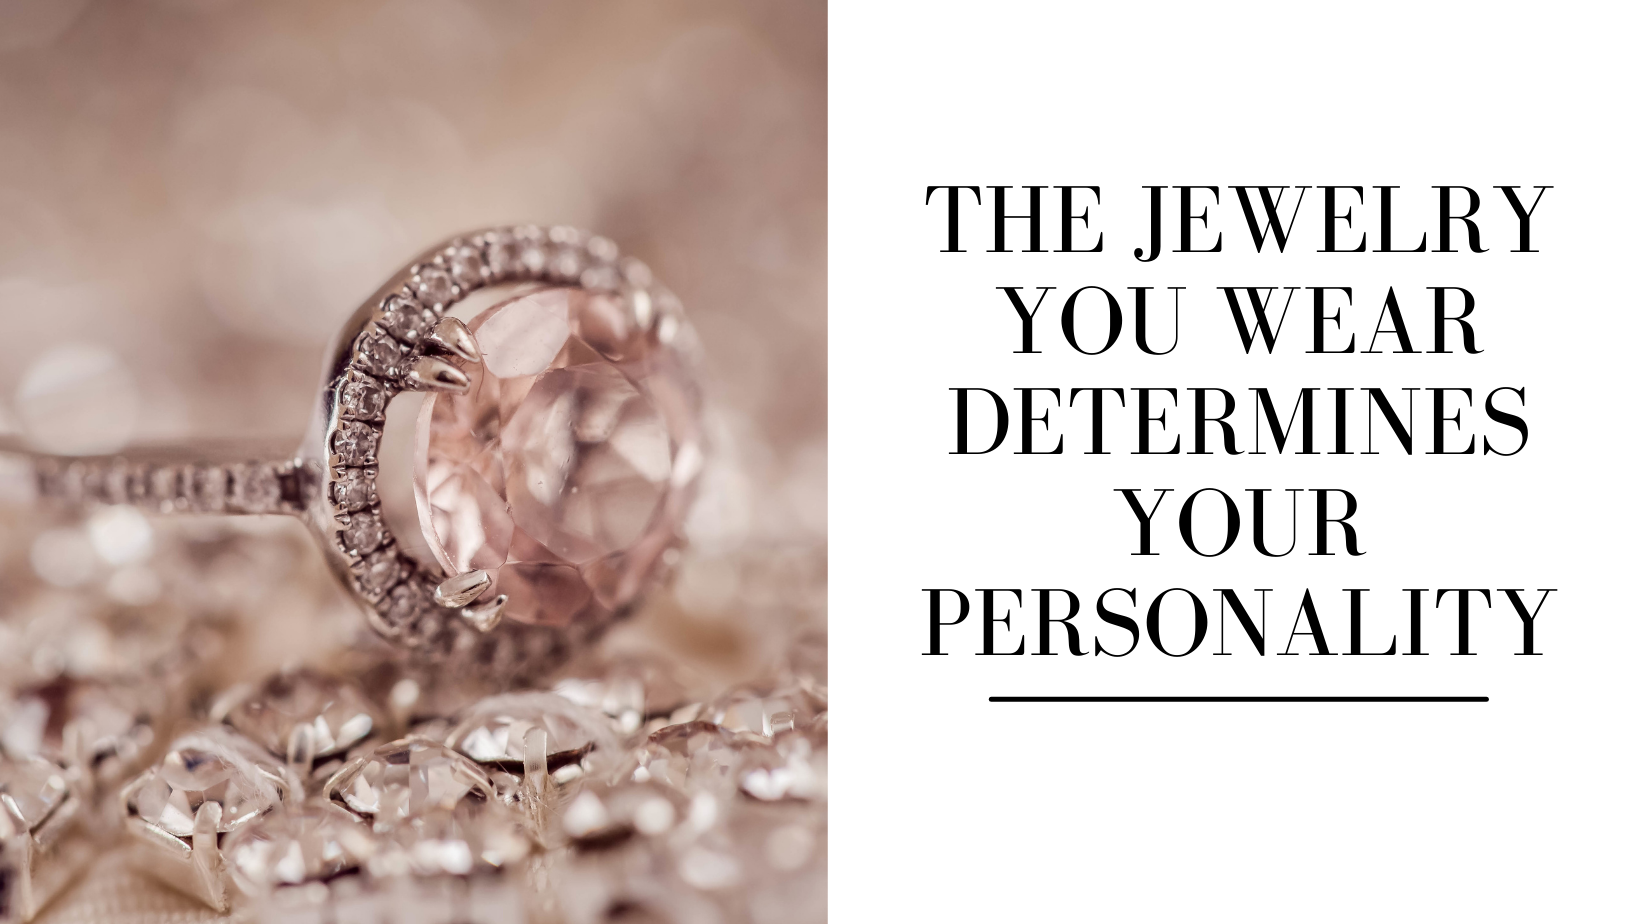 The jewelry you wear determines your personality